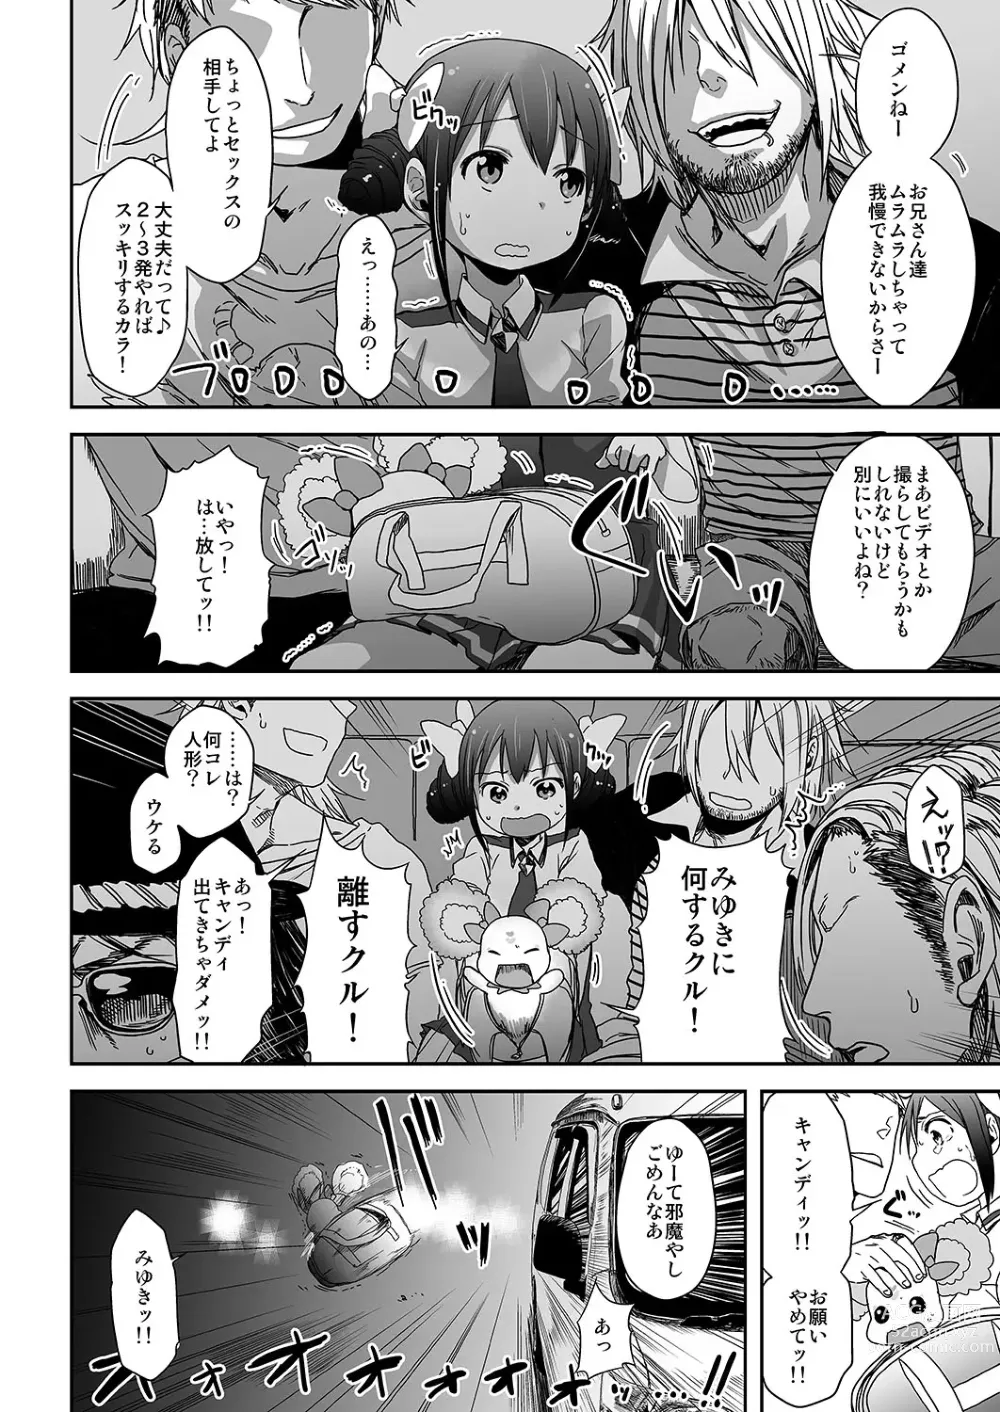 Page 4 of imageset 荒草まほん(476409)【Deleted】